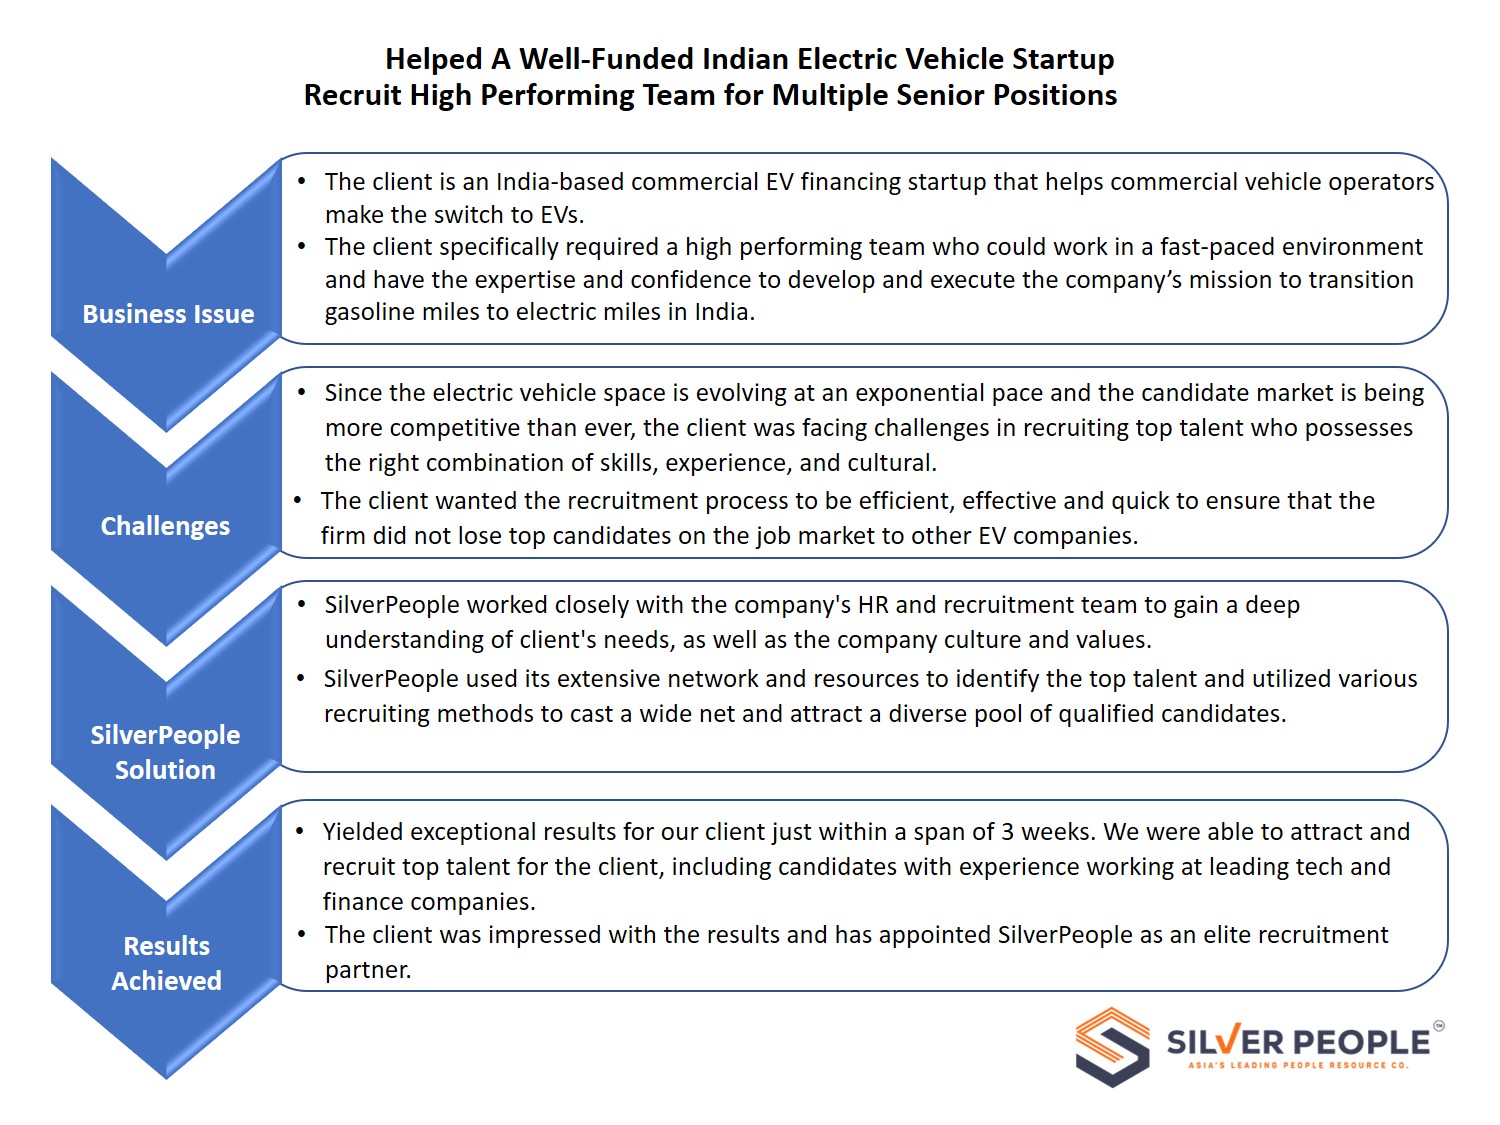 Helped A Well-Funded Indian Electric Vehicle Startup Recruit High Performing Team for Multiple Senior Positions